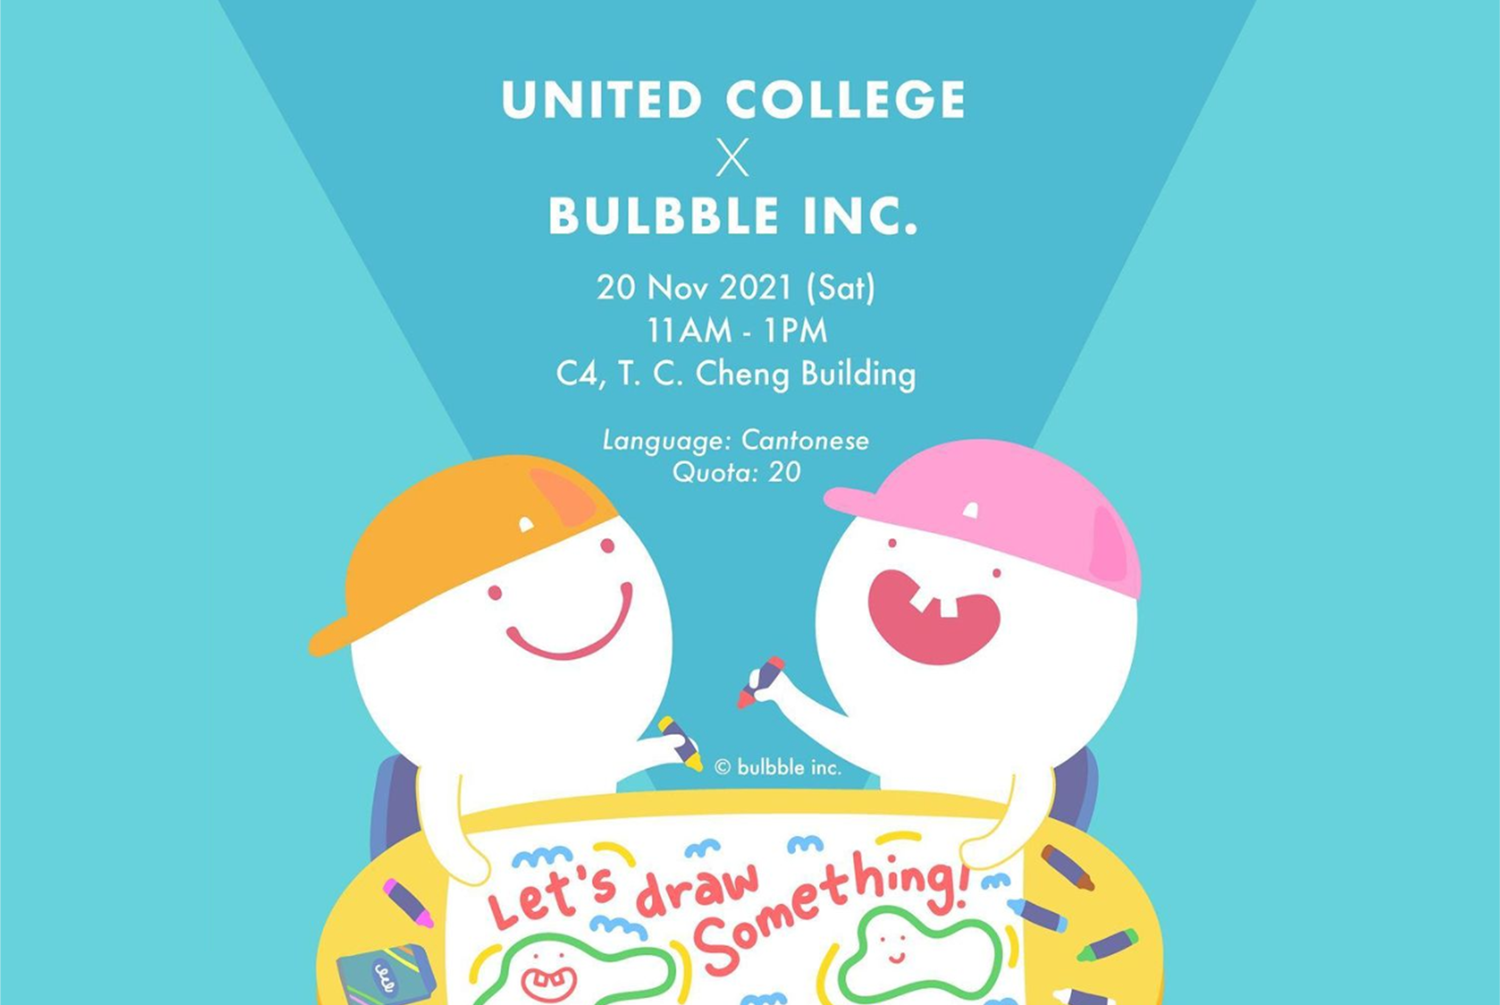 United College X Bulbble Inc. – Let’s Draw Something!